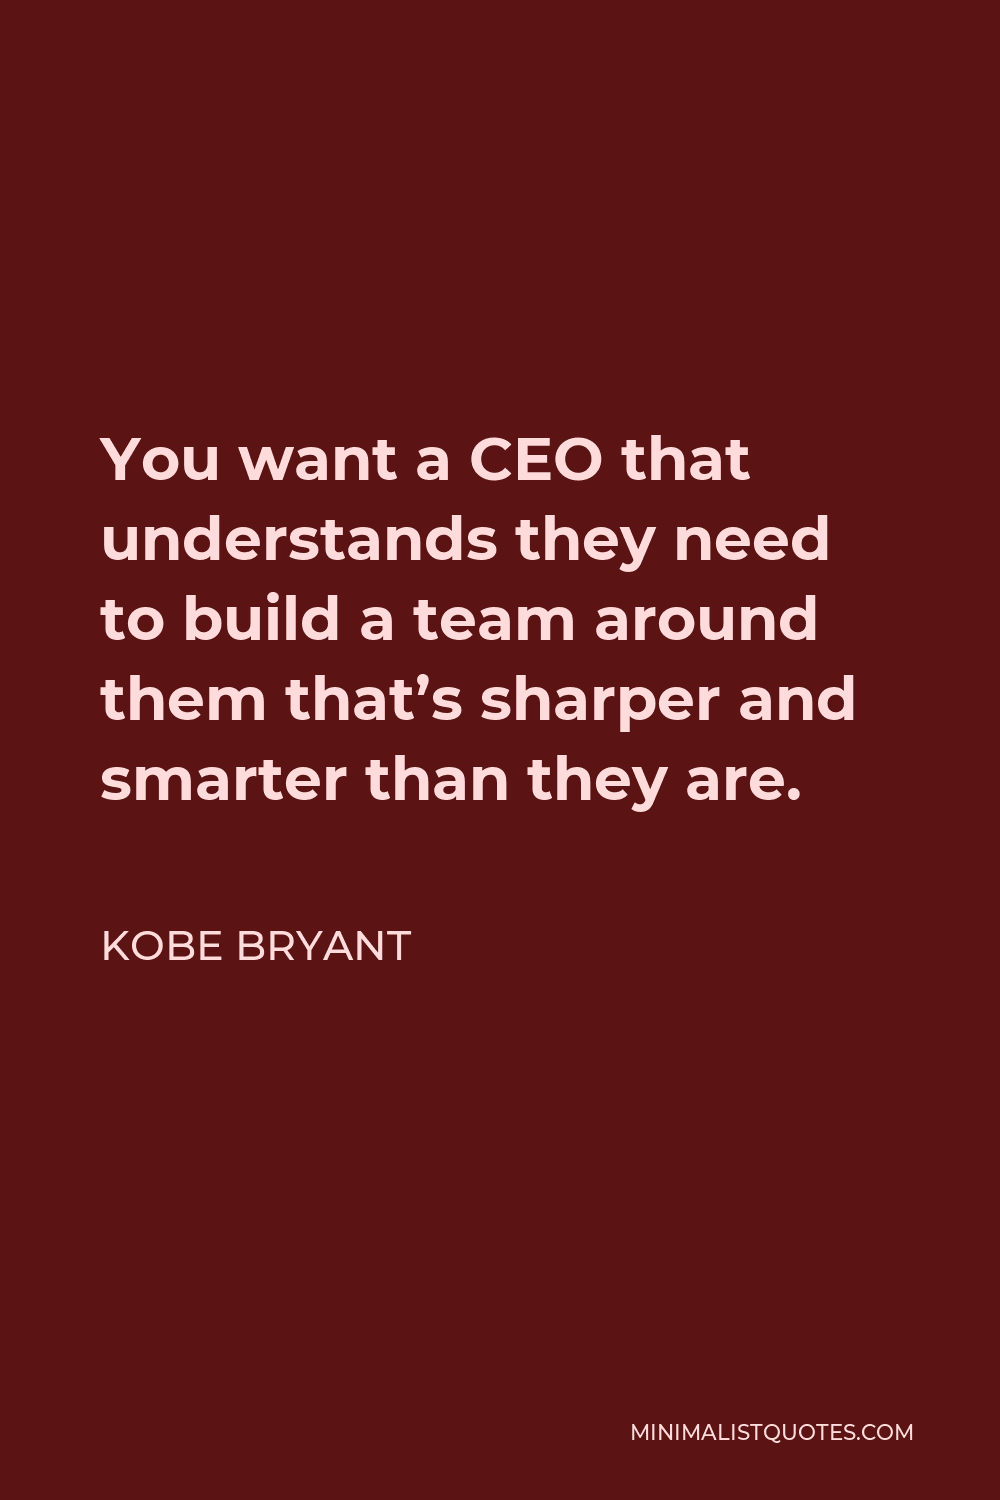 Kobe Bryant Quote - You want a CEO that understands they need to build a team around them that’s sharper and smarter than they are.